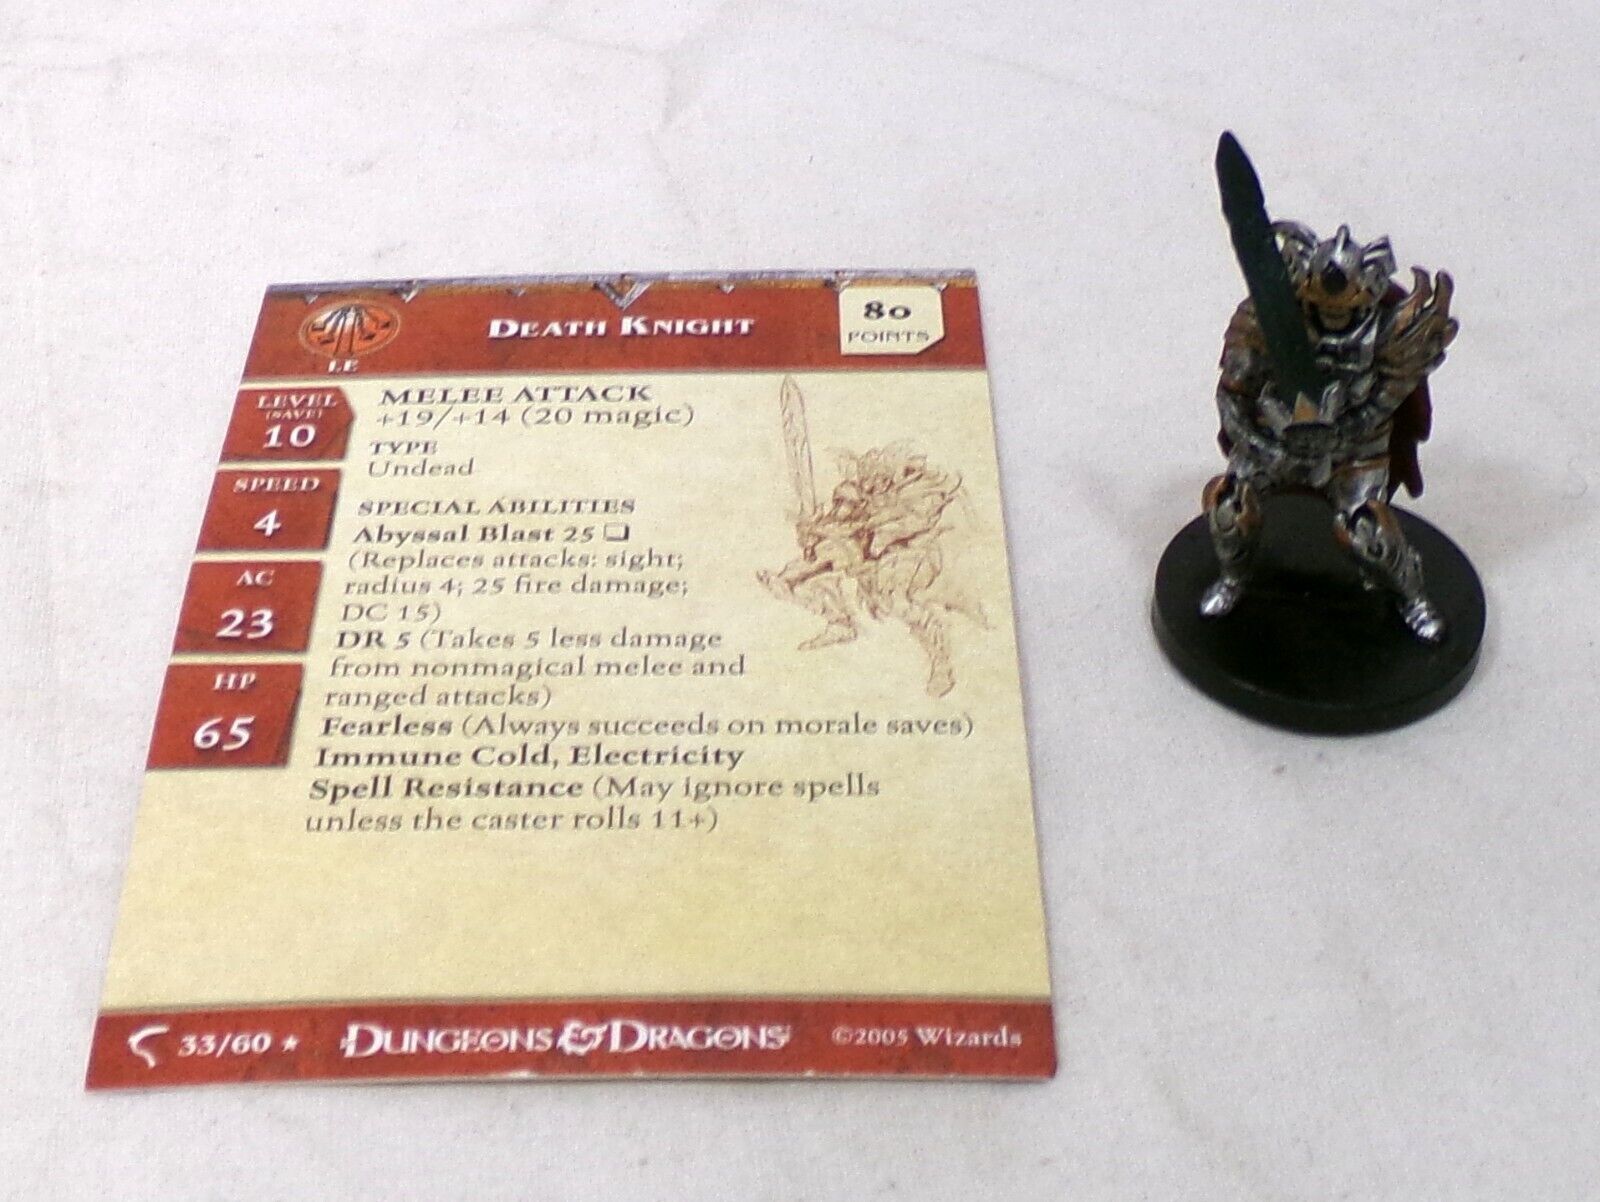 Wizards of the Coast Dungeons & Dragons Deathknell Death Knight Miniature